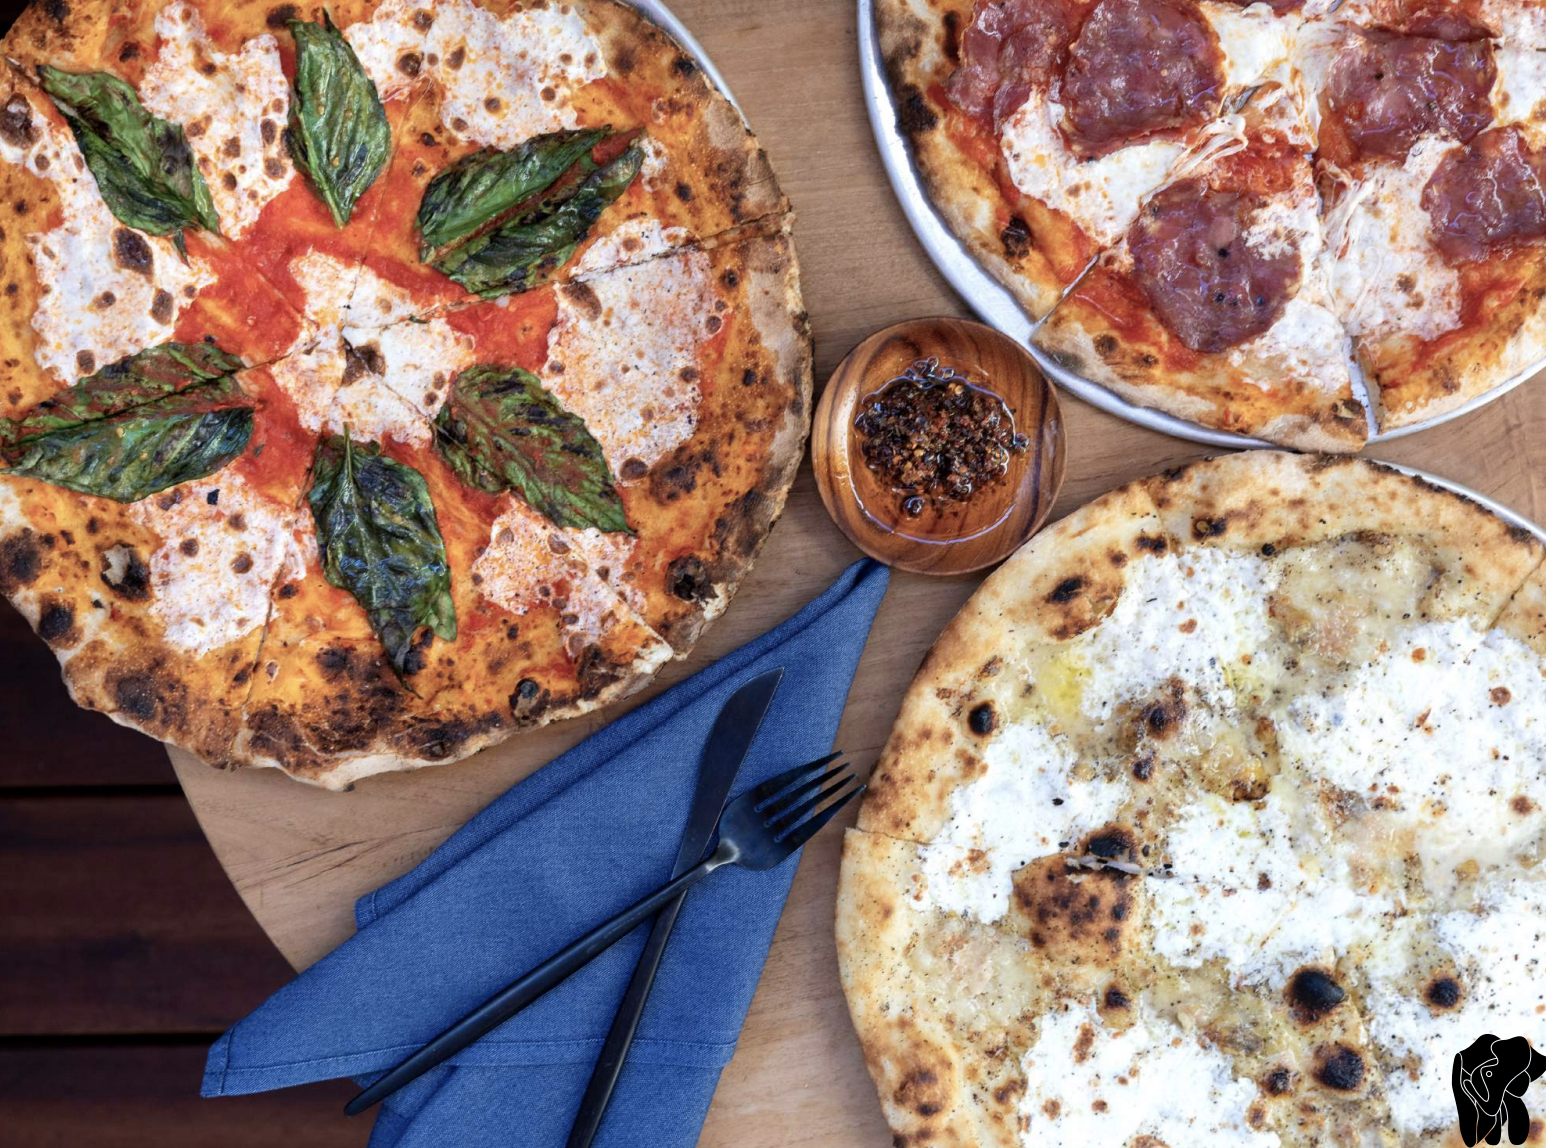 Pizzas, blistered and shot from overhead, shown at Elephante in Santa Monica.